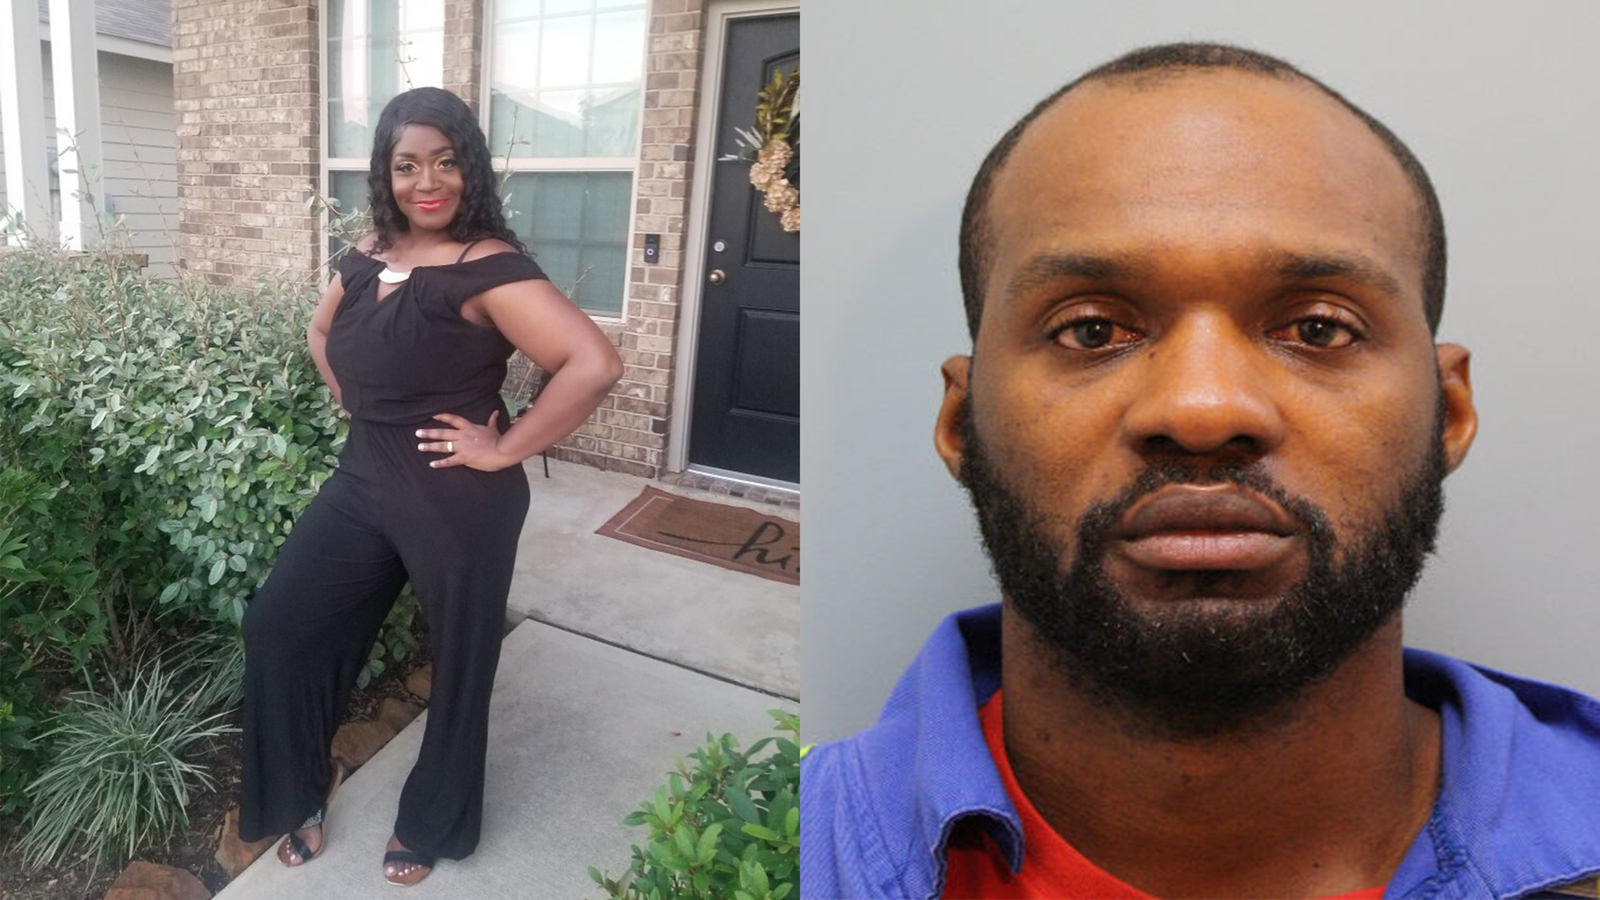 Domestic violence death: Jason Jermaine Armster sentenced 55 years for killing his wife at Sheldon-area home in March 2020 [Video]